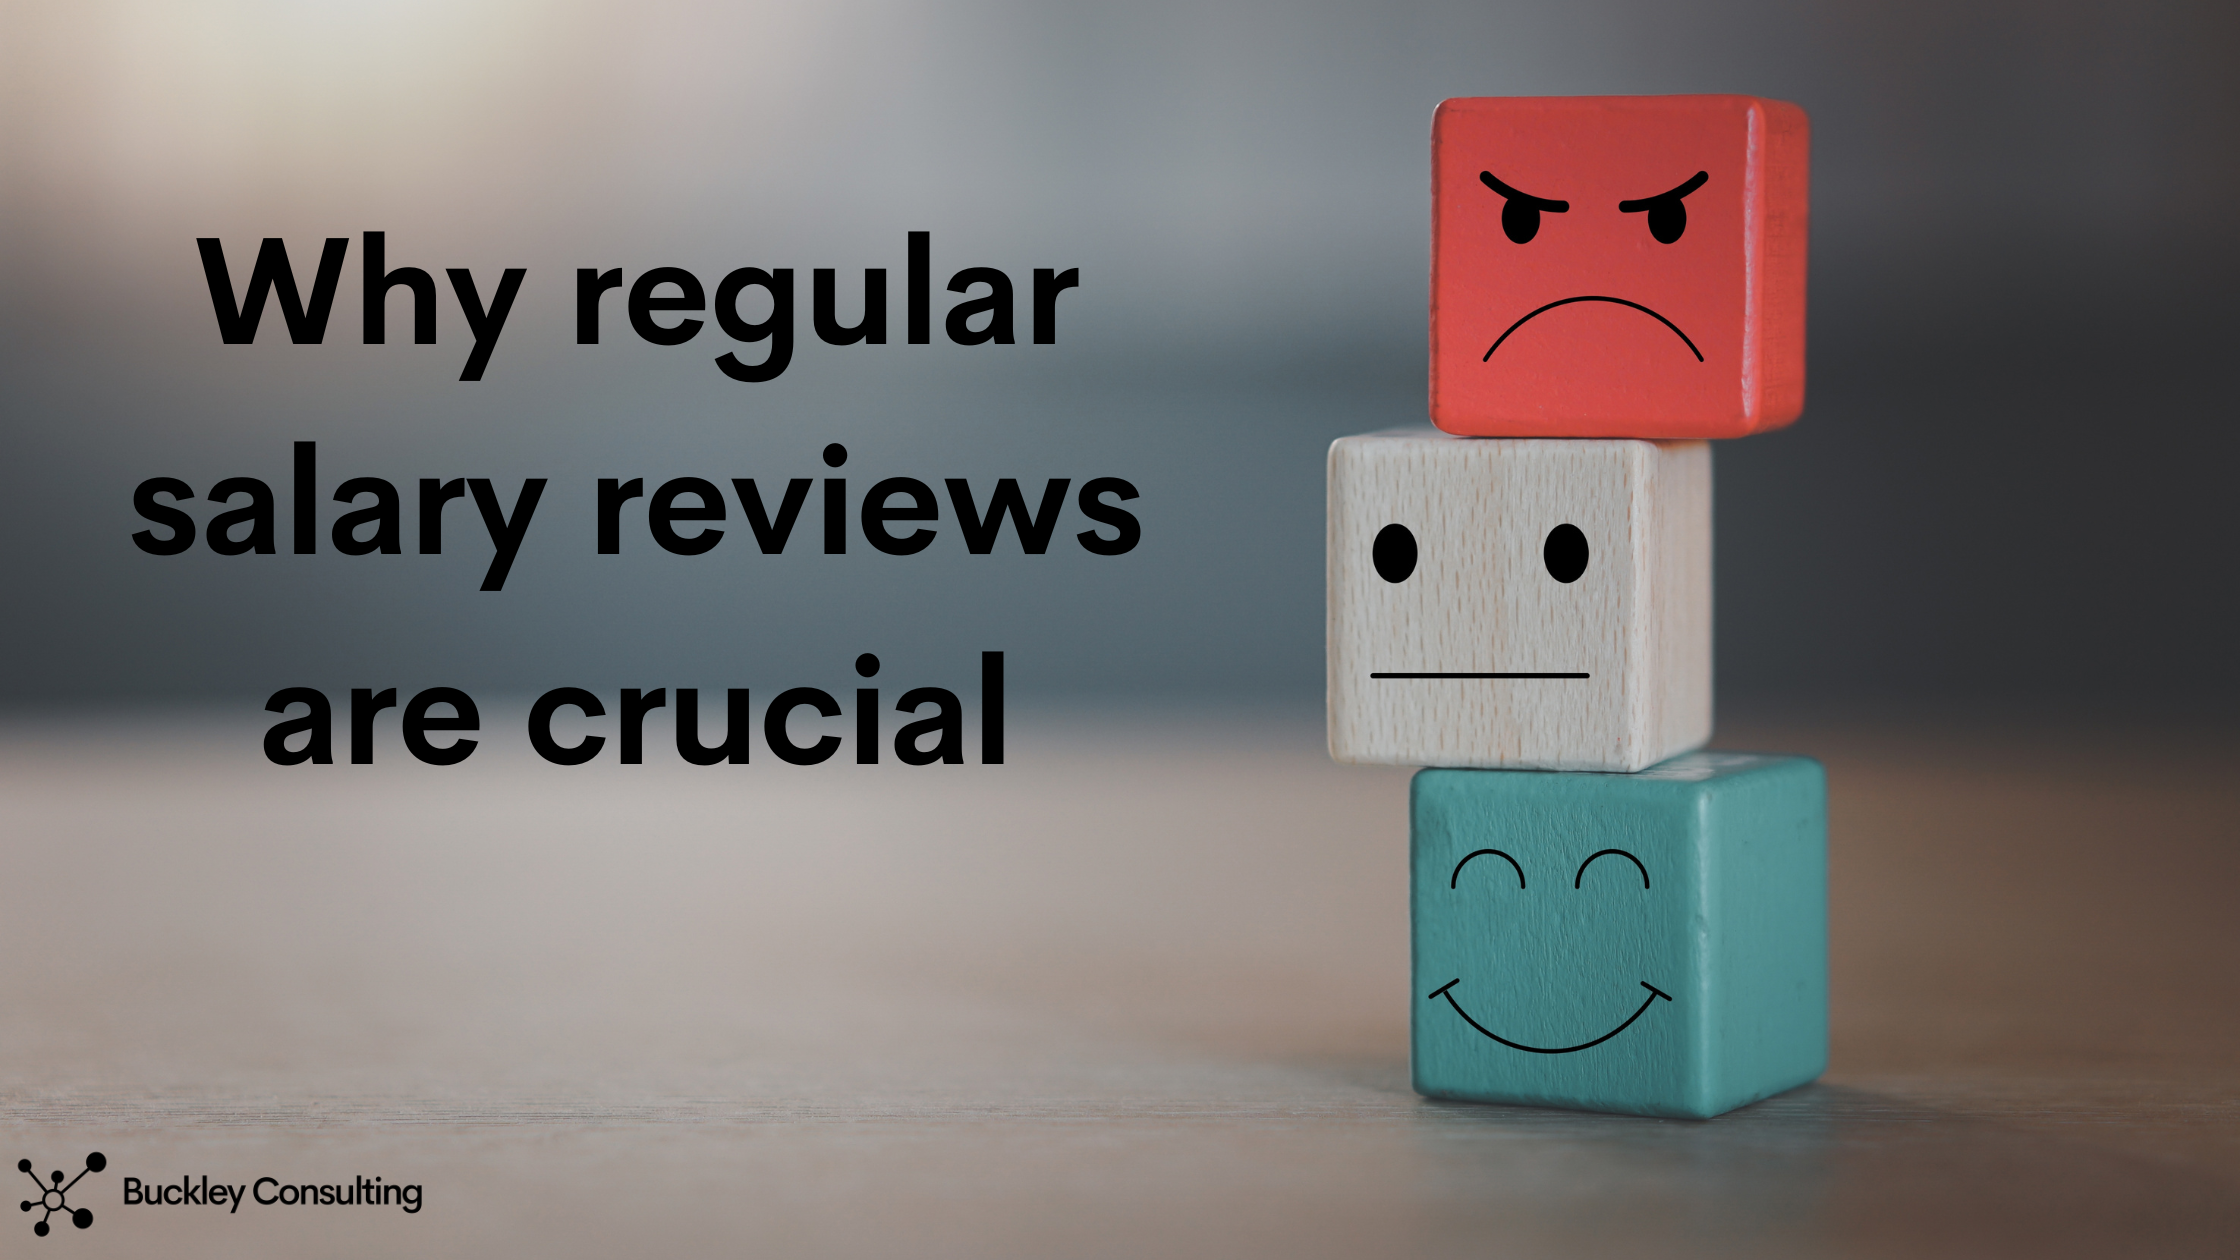 Why regular salary reviews are crucial